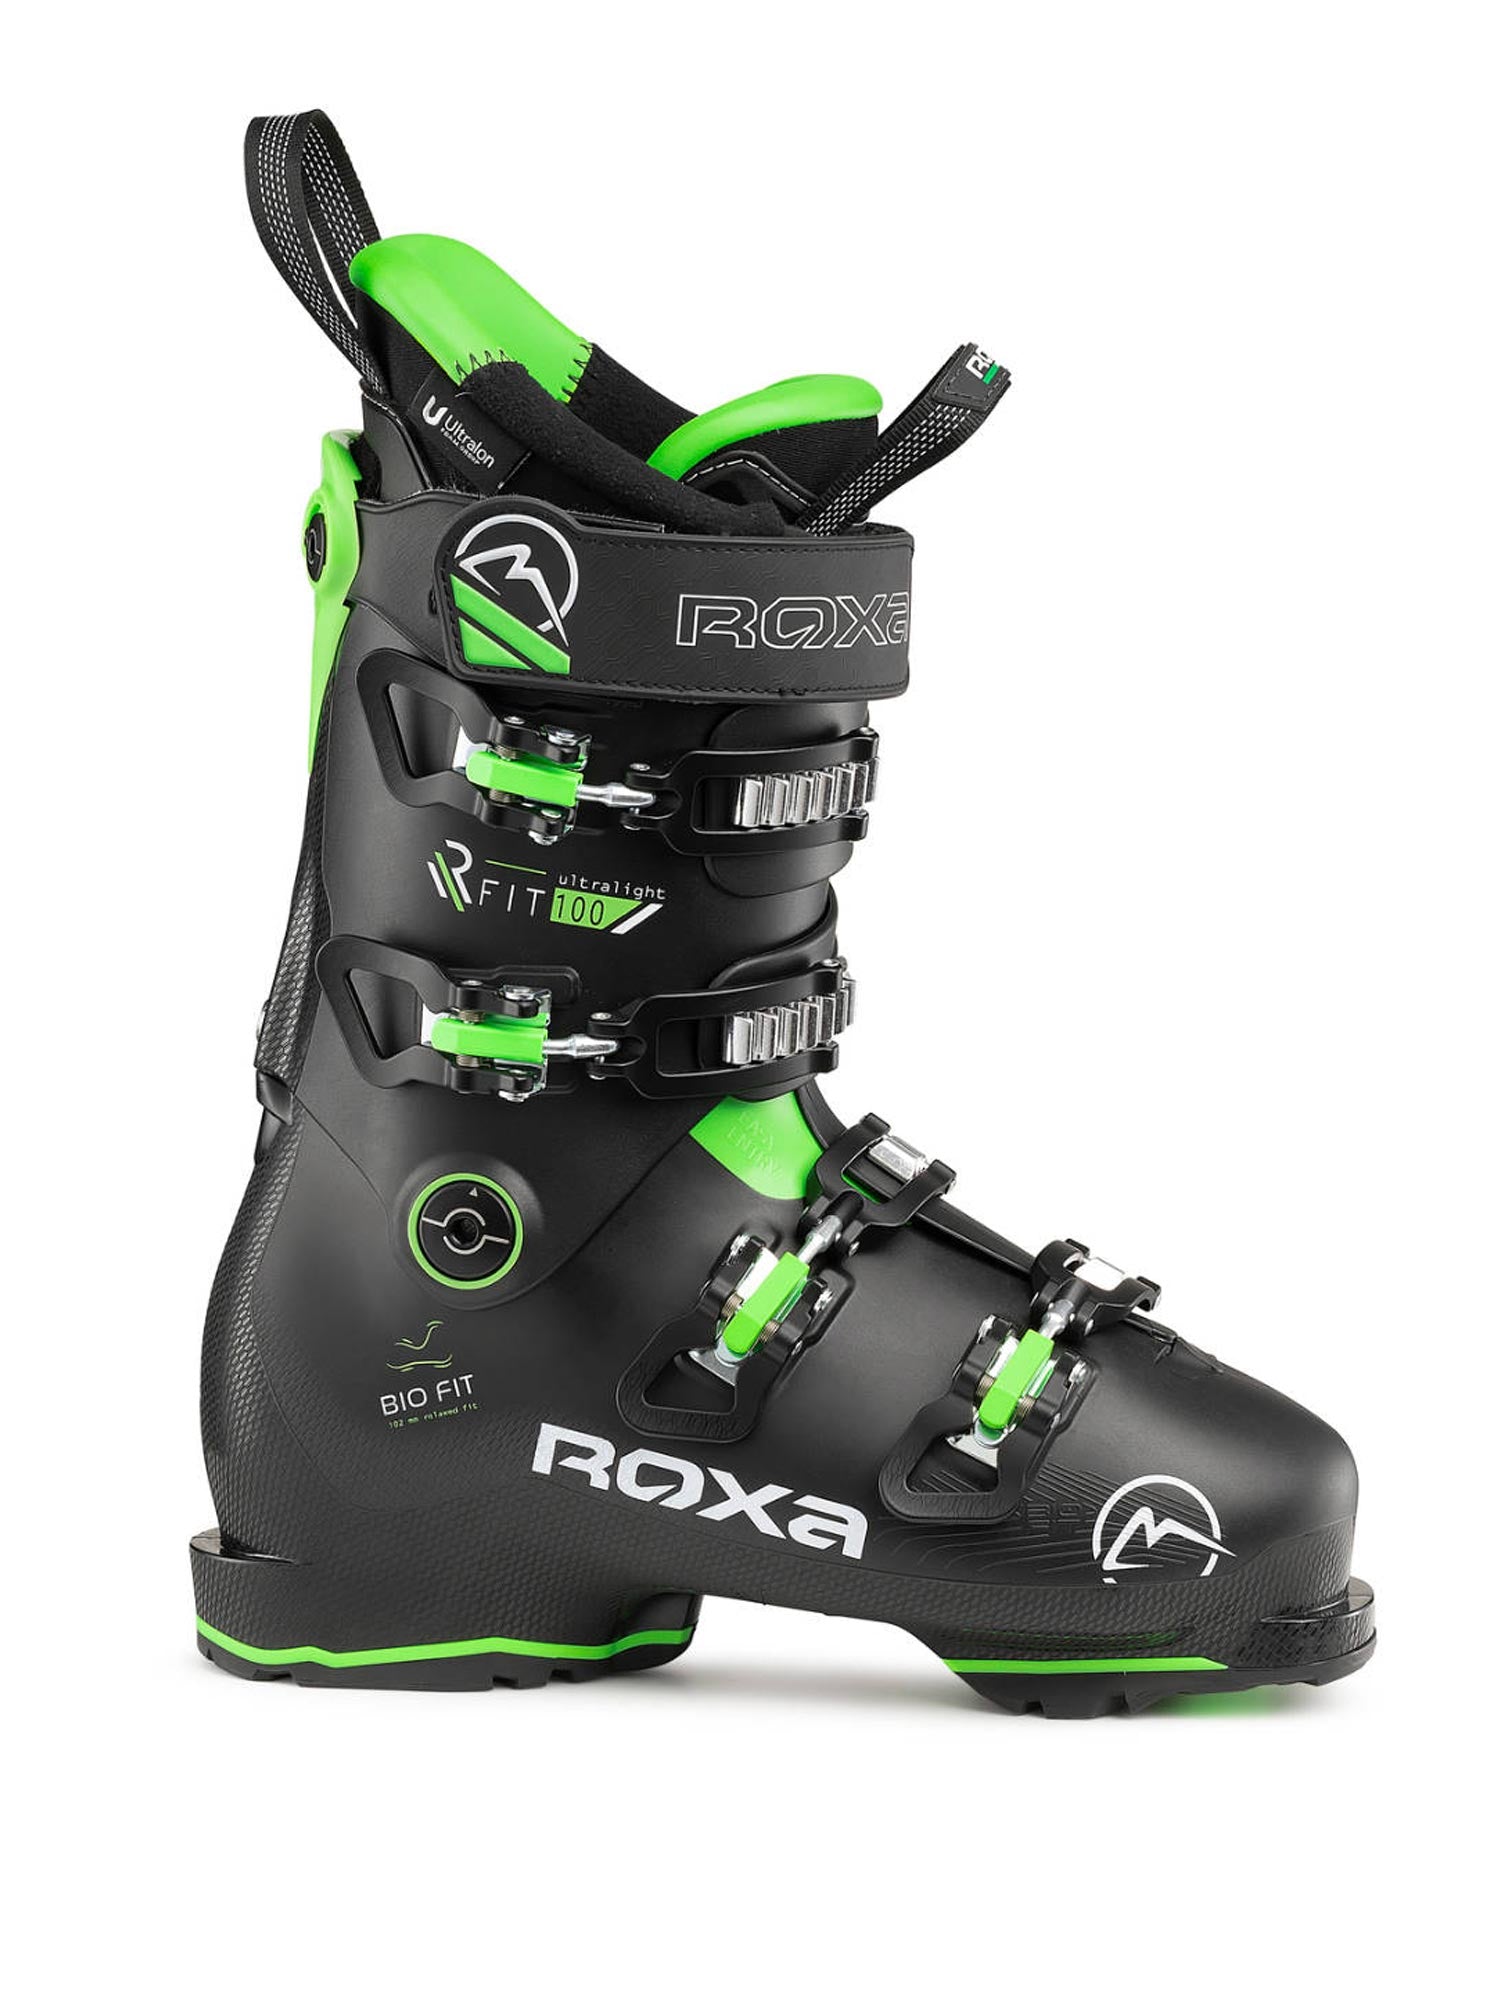 men's Roxa RFit 100 ski boots, black with lime green accents